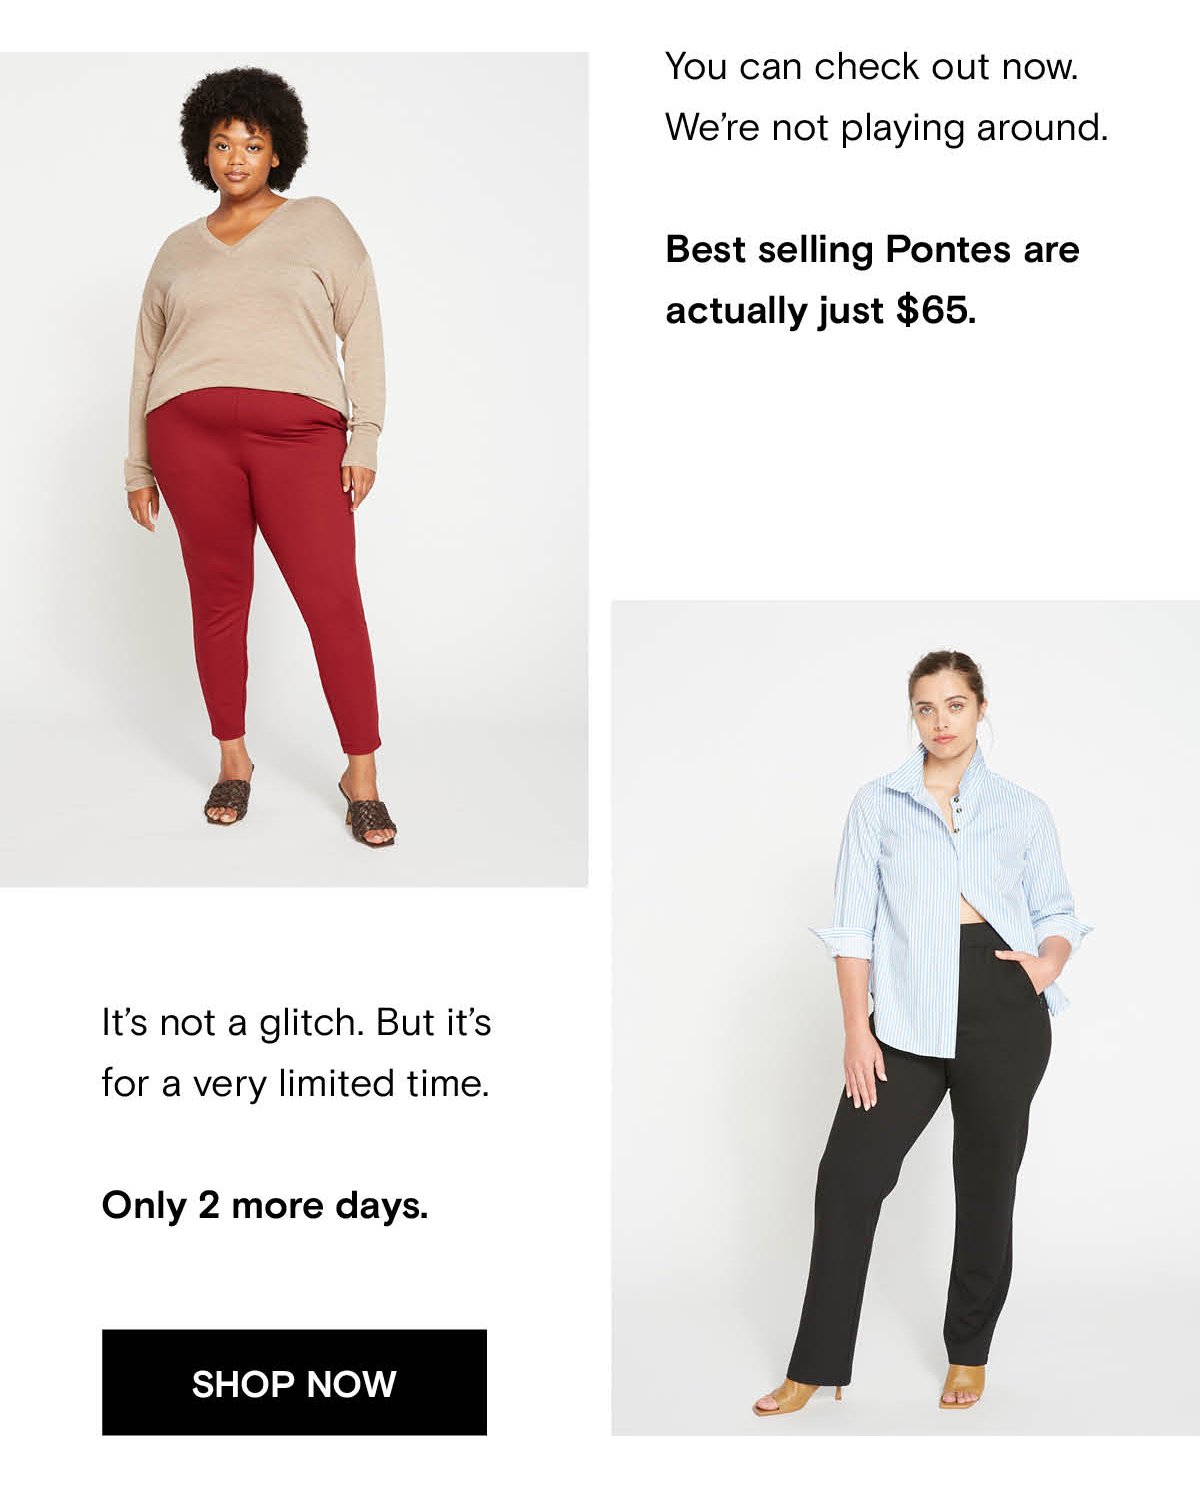 Only 2 more days of $65 ponte pants